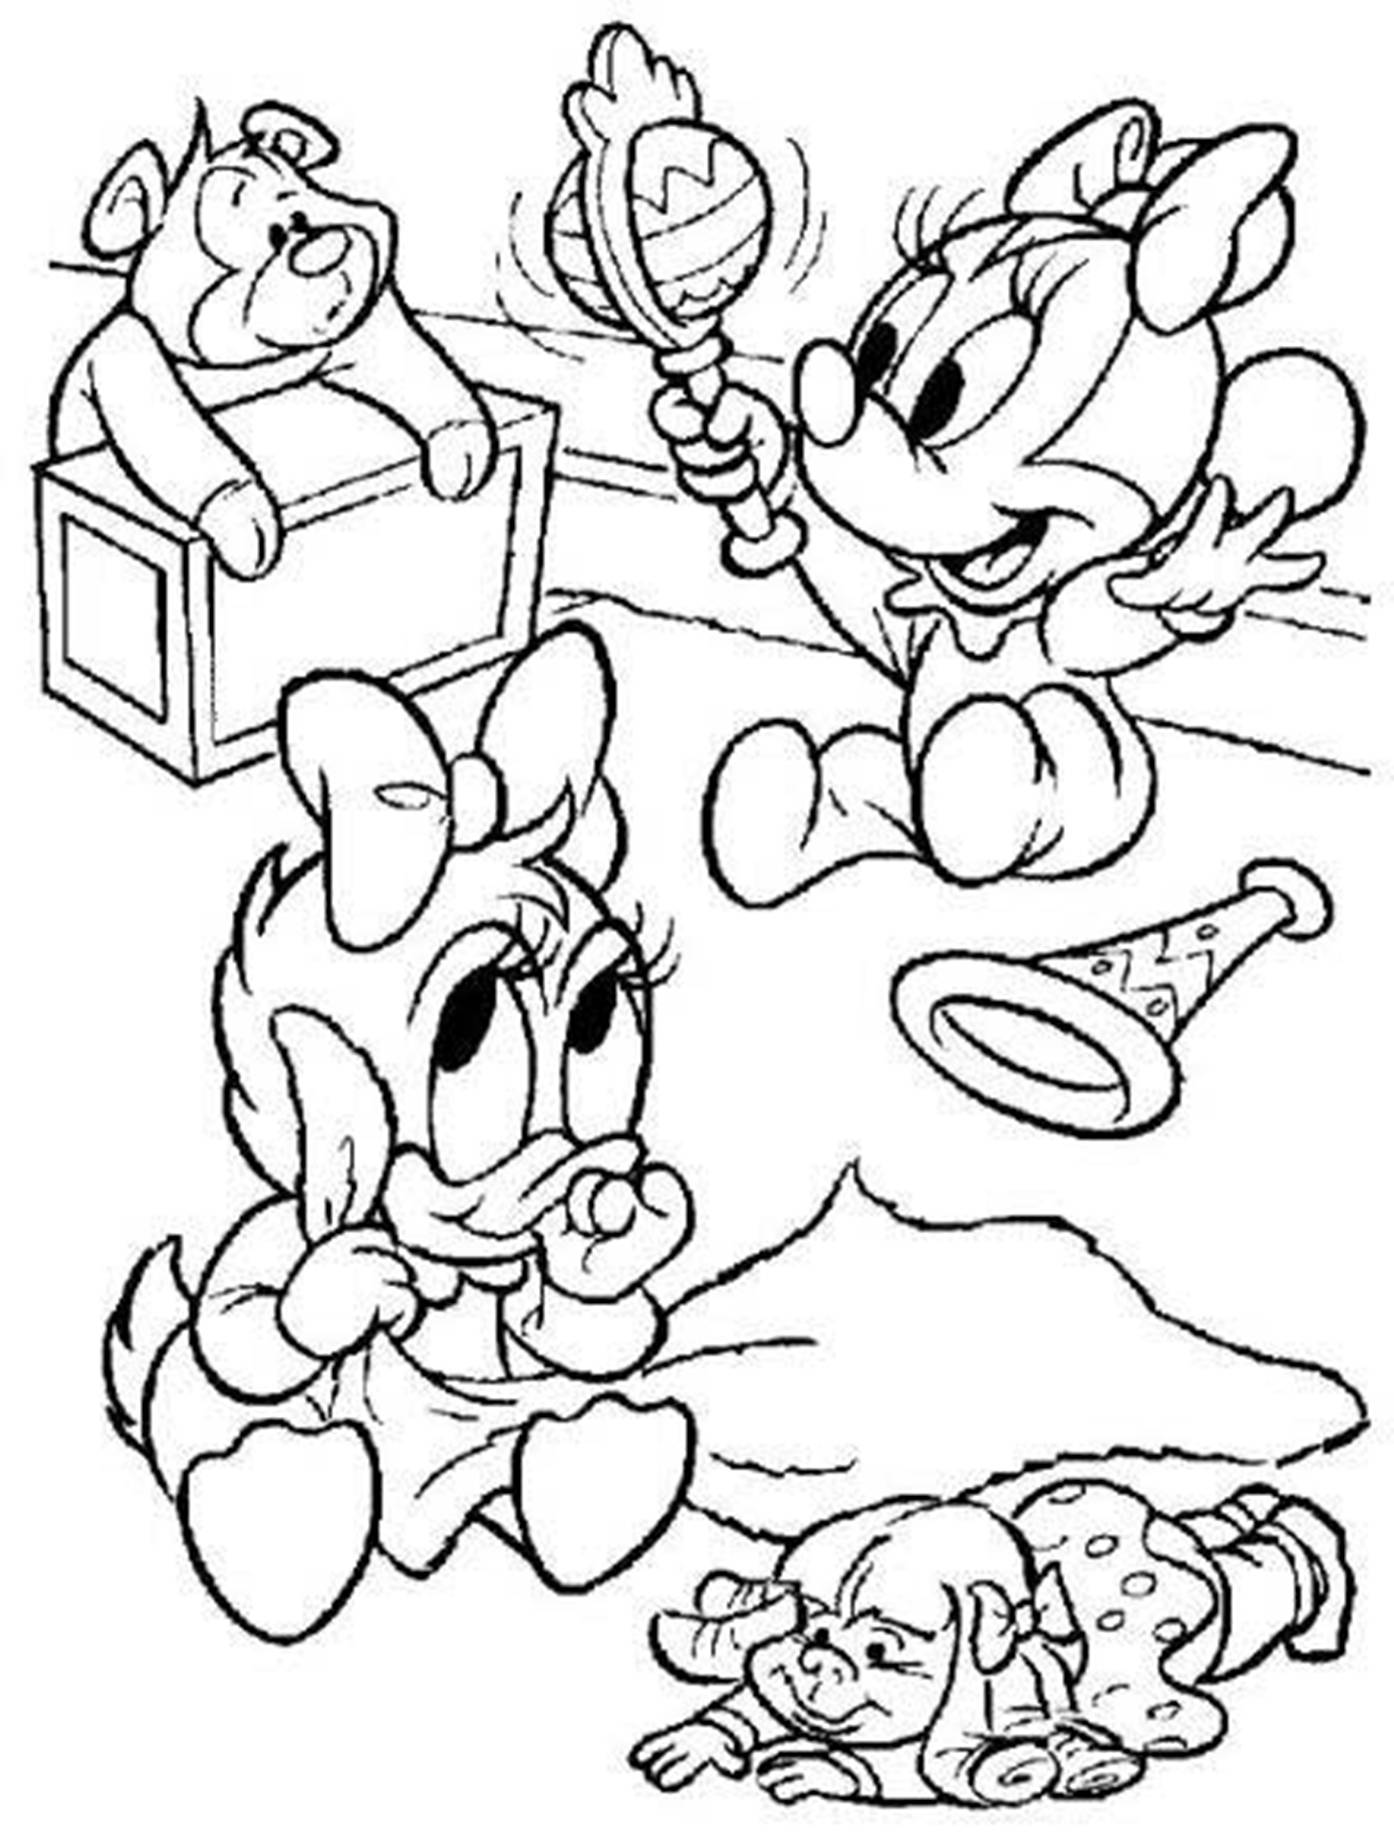 Daisy And Donald Duck Coloring Pages | Cartoon Coloring pages of ...